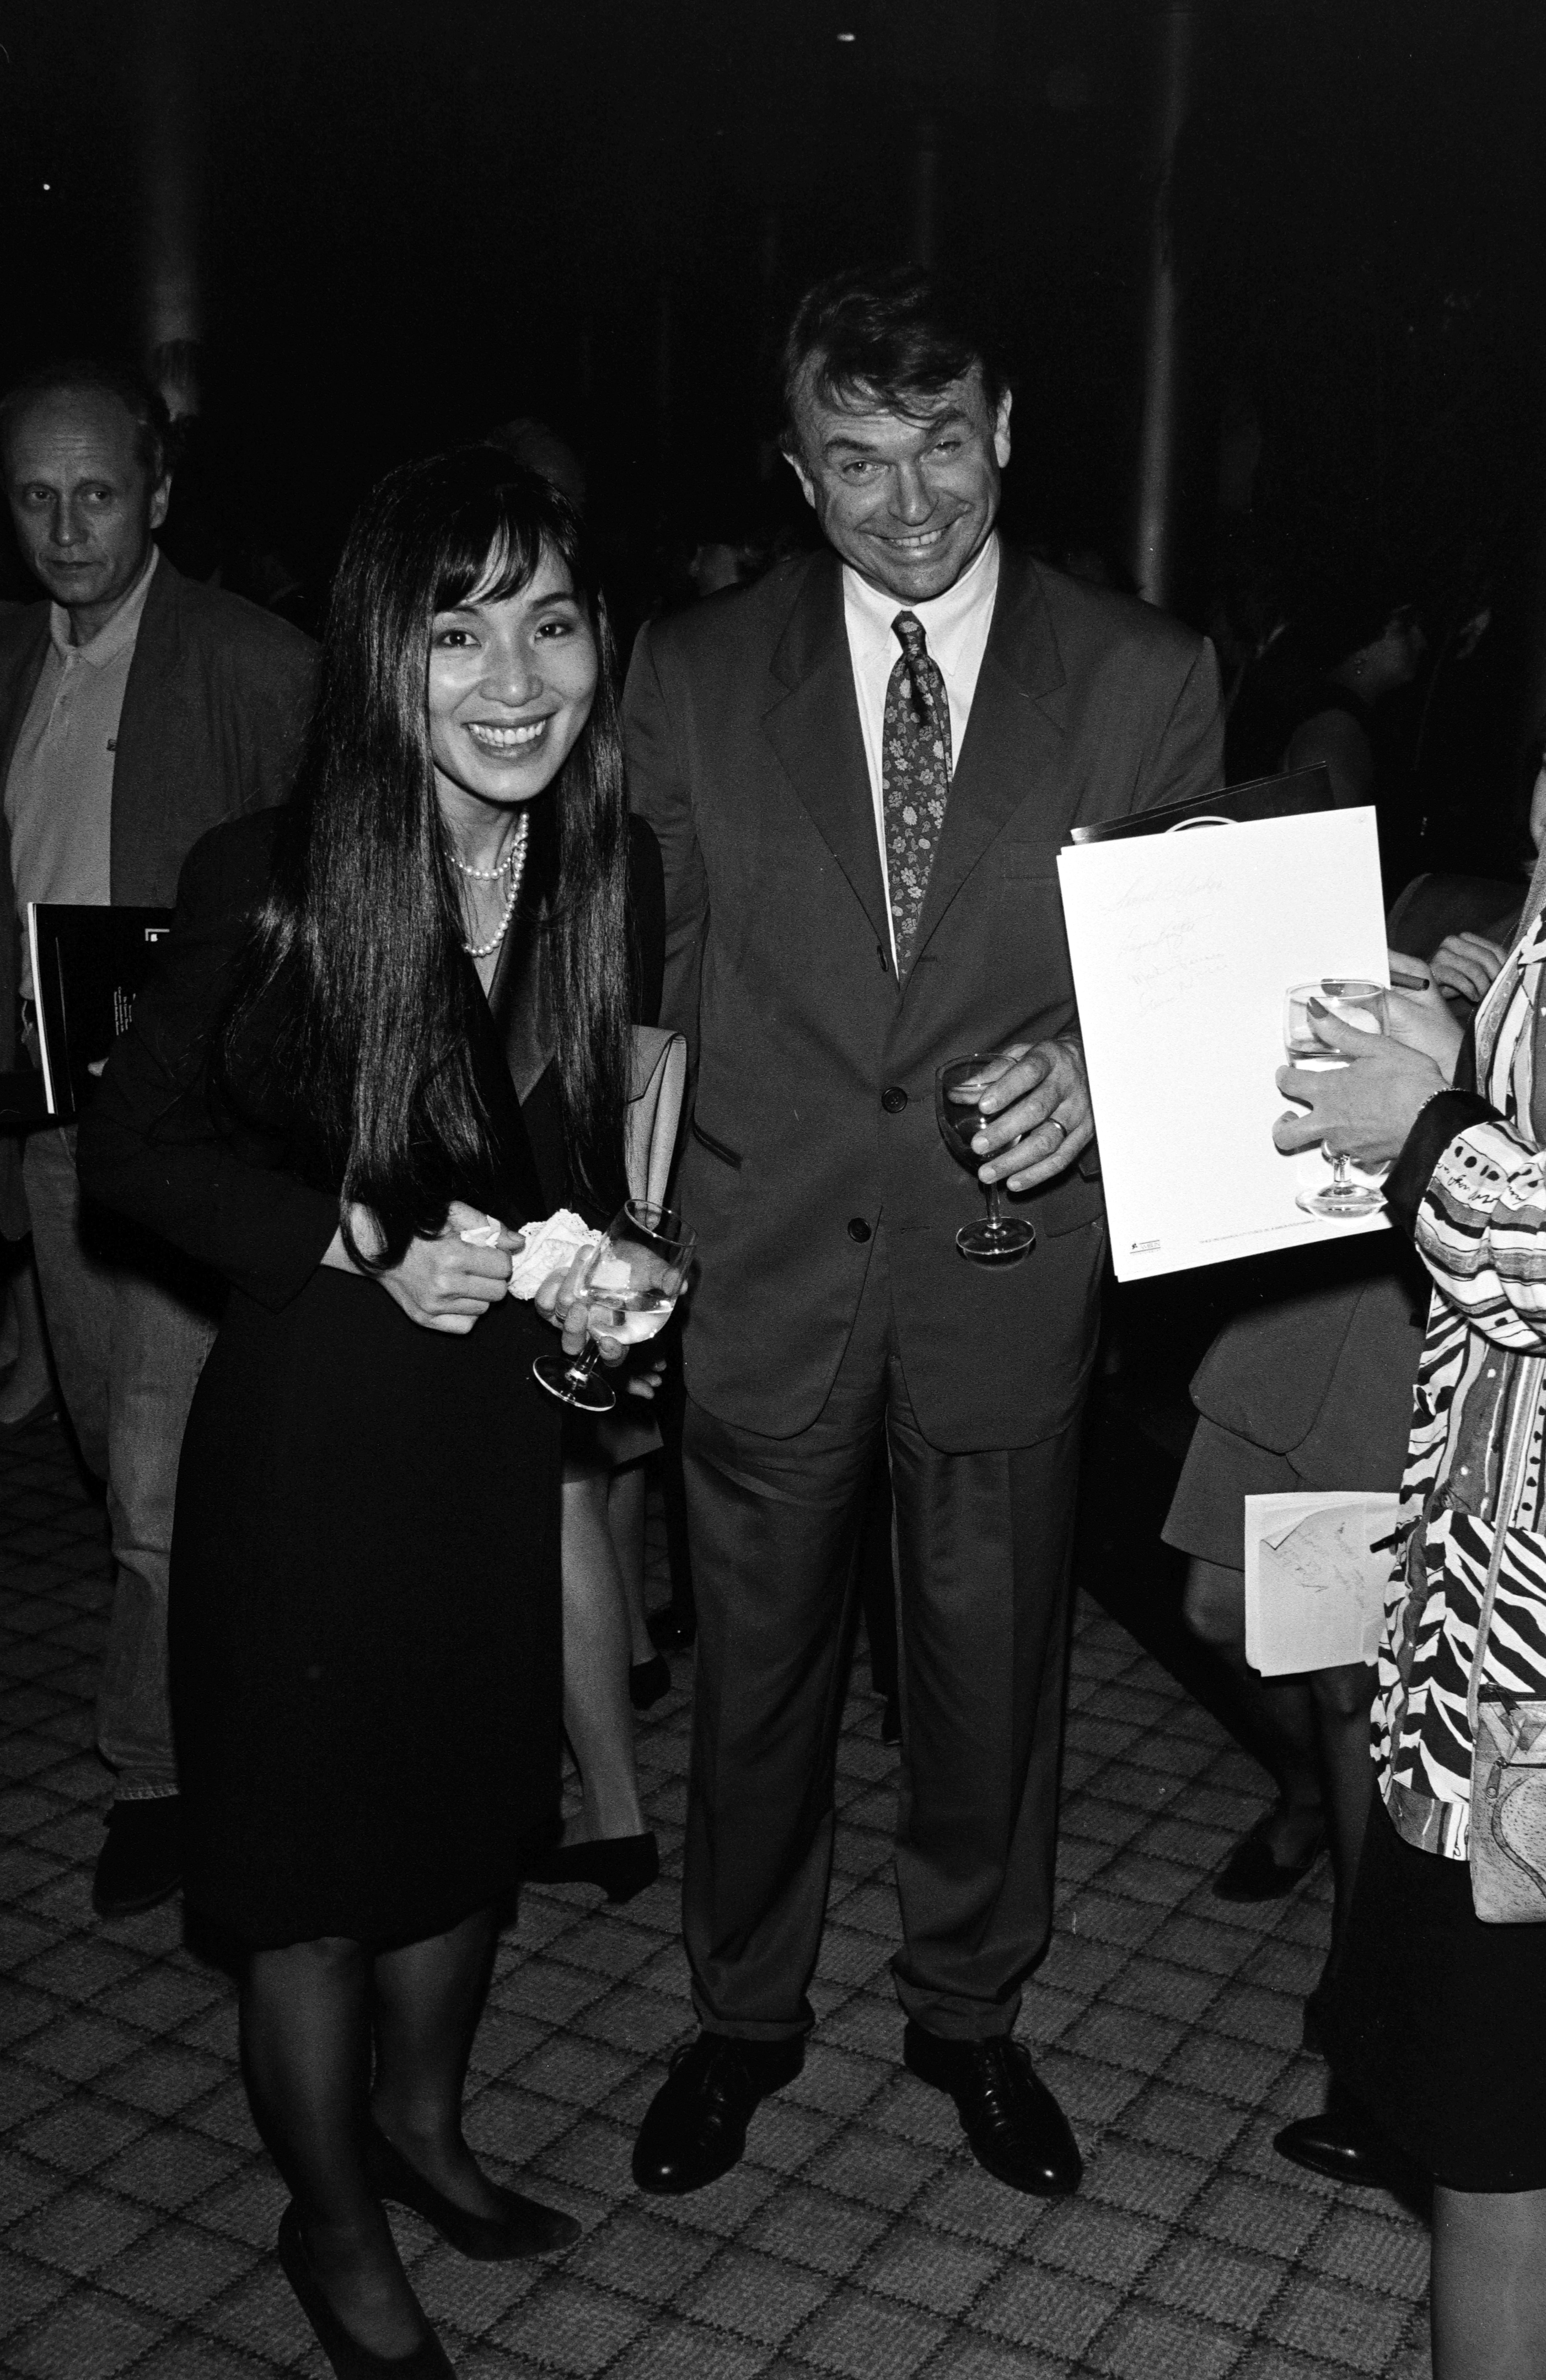 Noriko Watanabe and Sam Neill attend an event at the Uptown Theater on June 9, 1993, in Washington, D.C. | Source: Getty Images